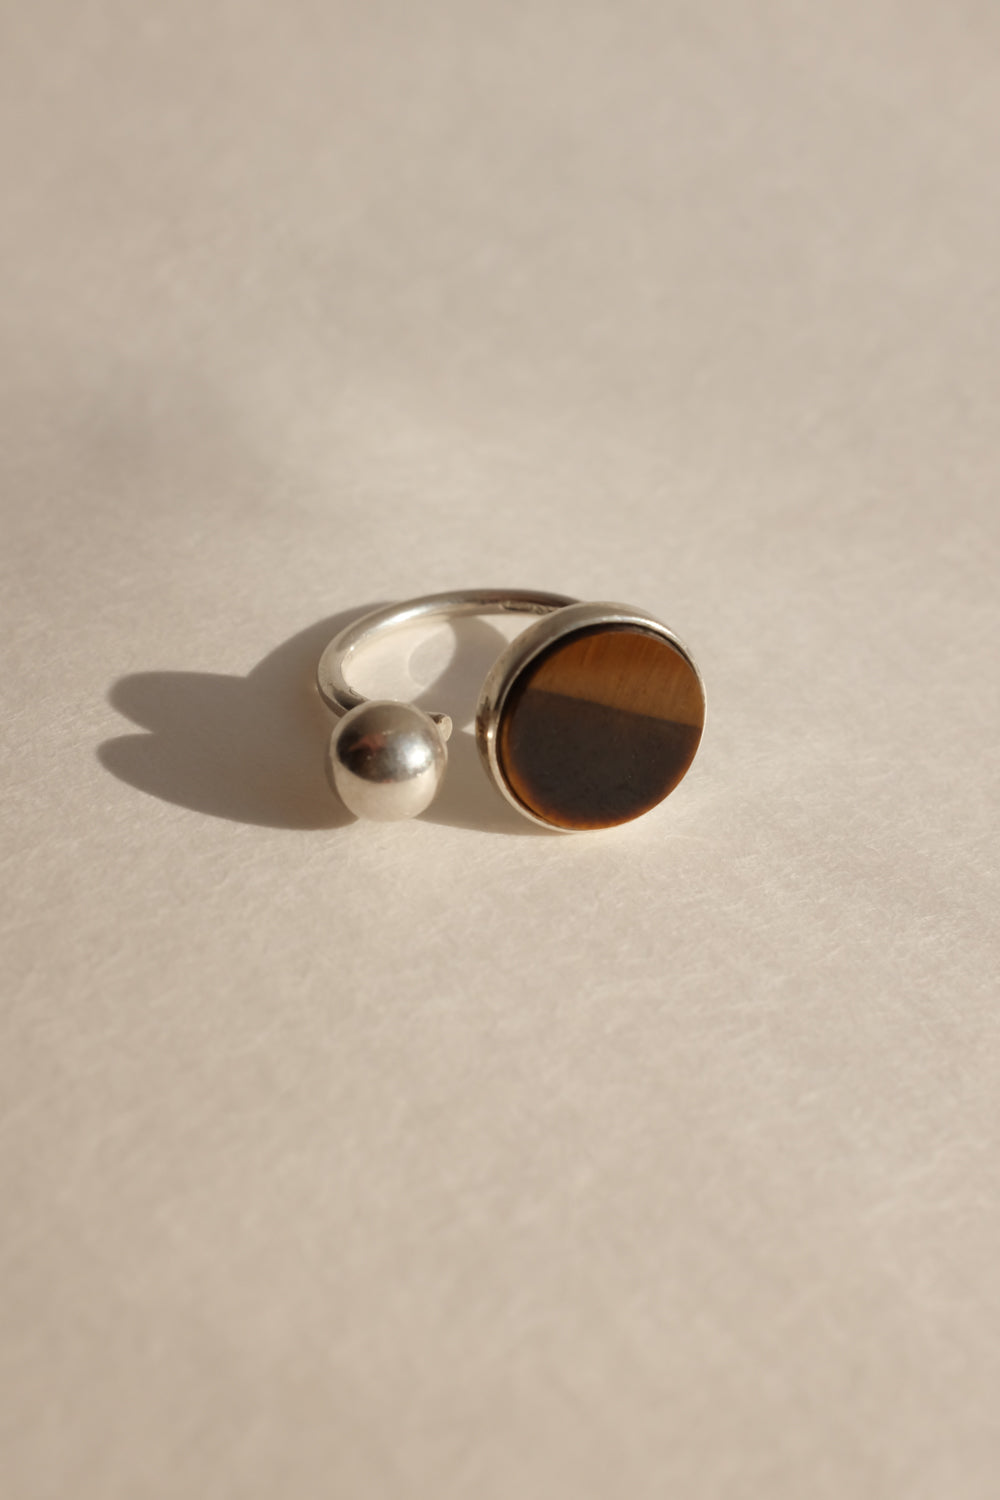 TIGEREYE STONE WITH SILVER BALL 925 VINTAGE RING